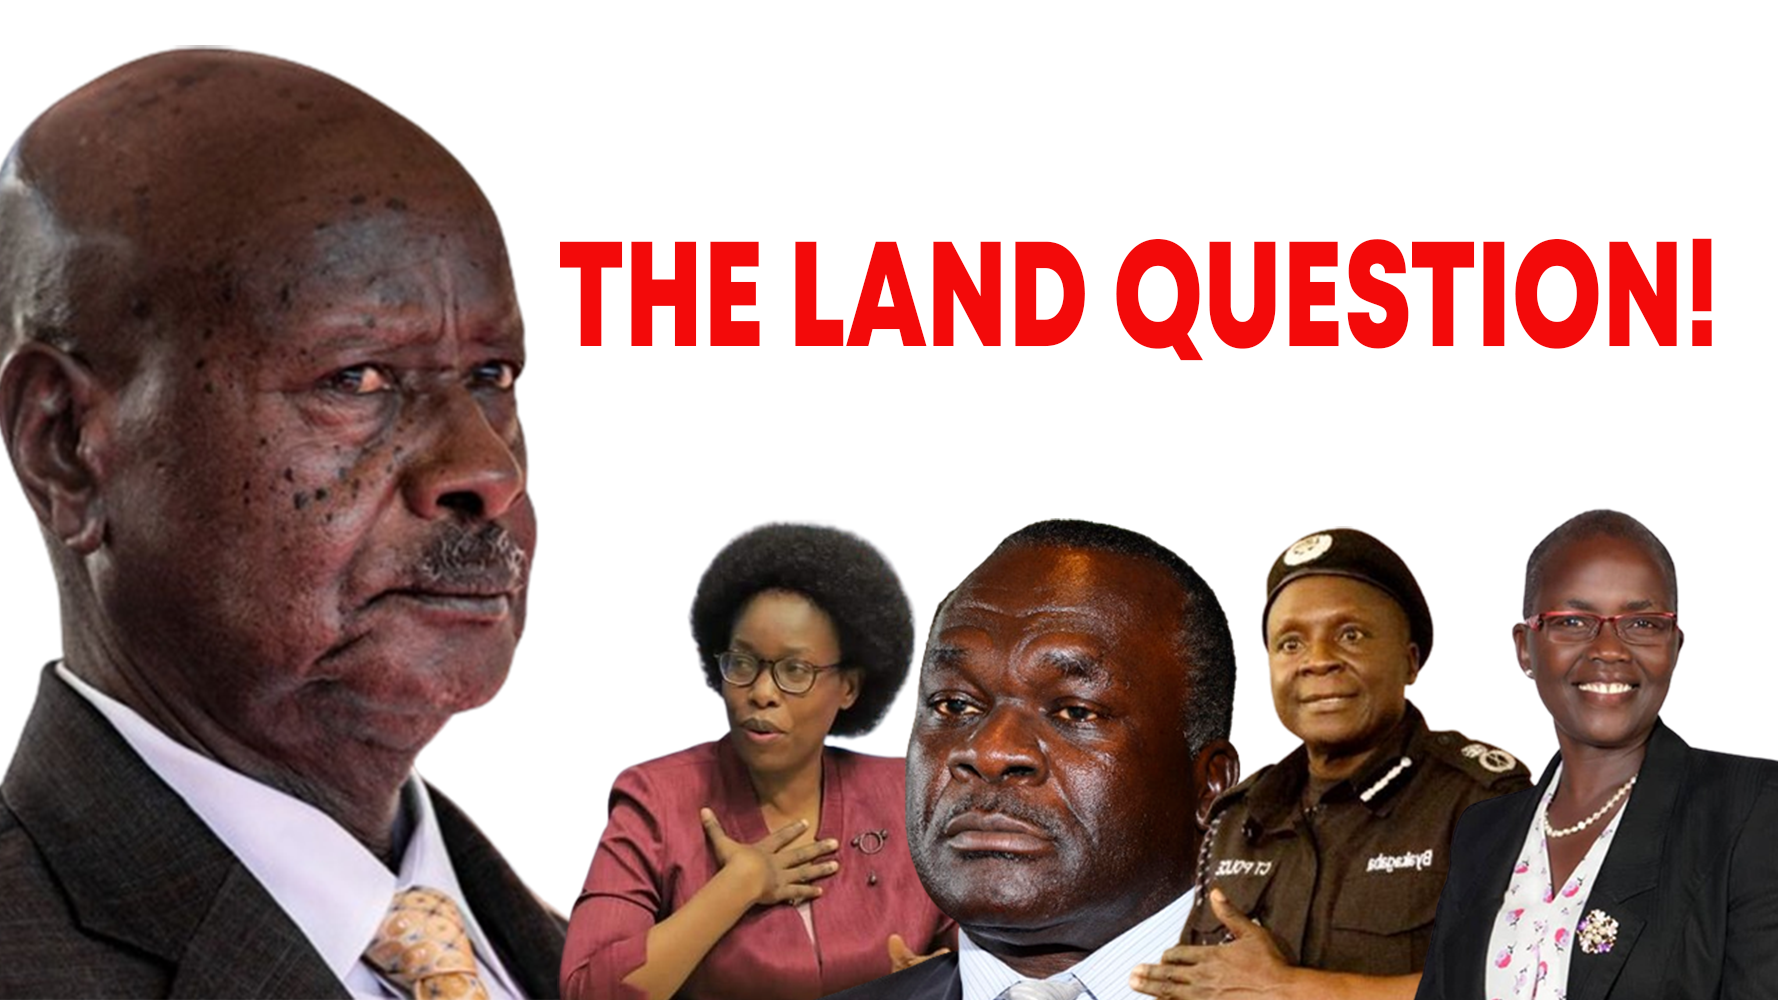 Deep State Politics: Banks Lose Billions Over Forged Land Titles, M7 Summoned Chief Justice Dollo, DPP Abodo, IGP Byakagaba And Land Ministry Nabakooba.